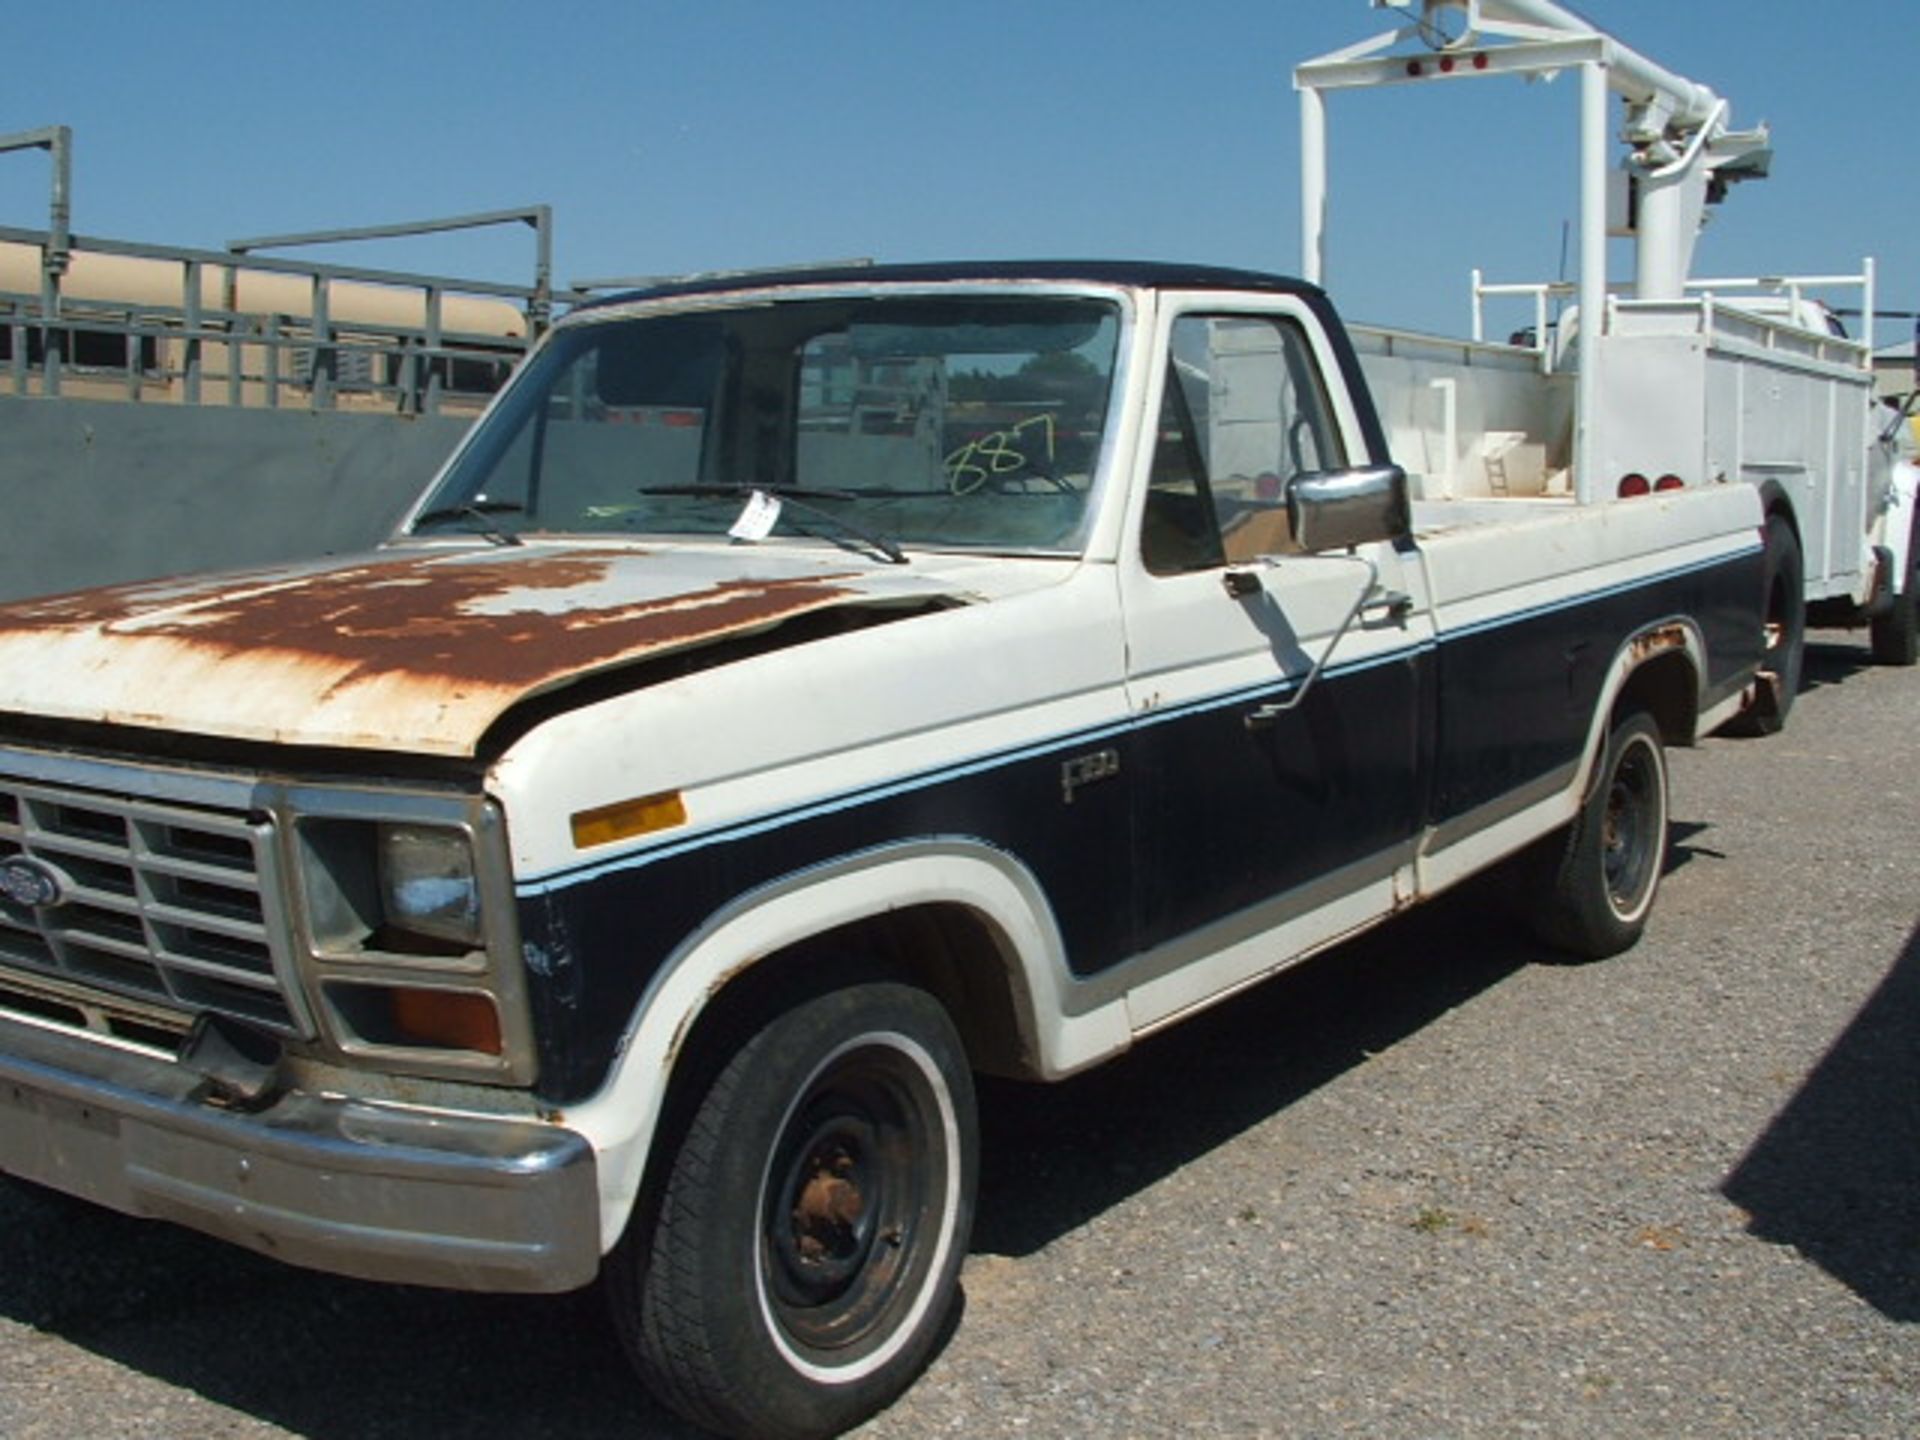 Lot 887 1984 Ford F150 Pickup 6Cyl 4Spd - Image 2 of 4